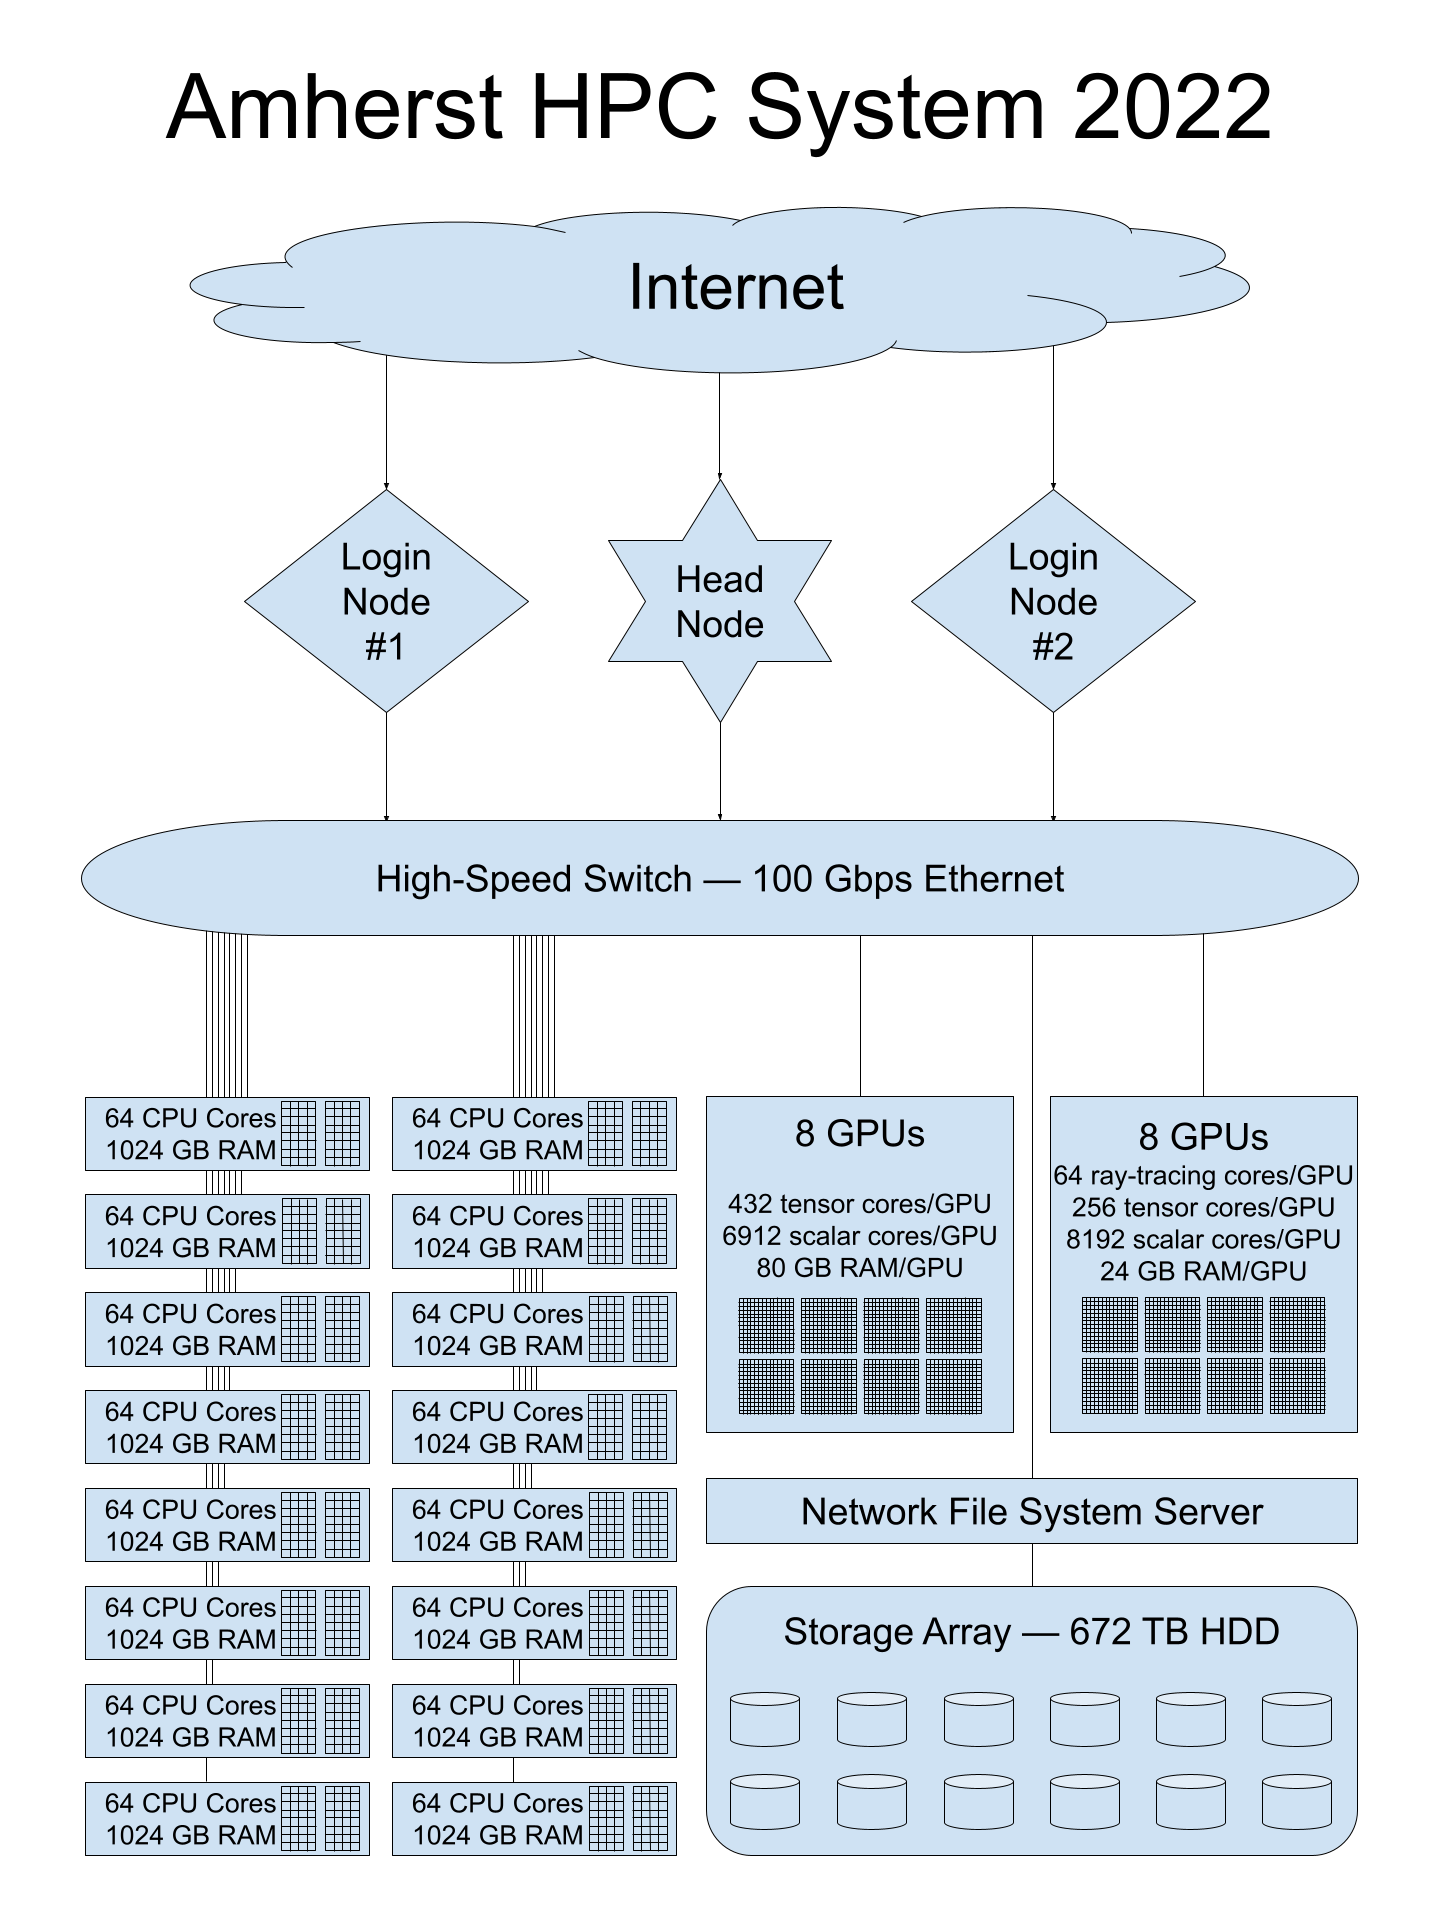 Diagram of the components of the HPC system, showing the head node, the login nodes, the 16 CPU nodes, the 2 GPU nodes, the disk array. and the high-speed switch.